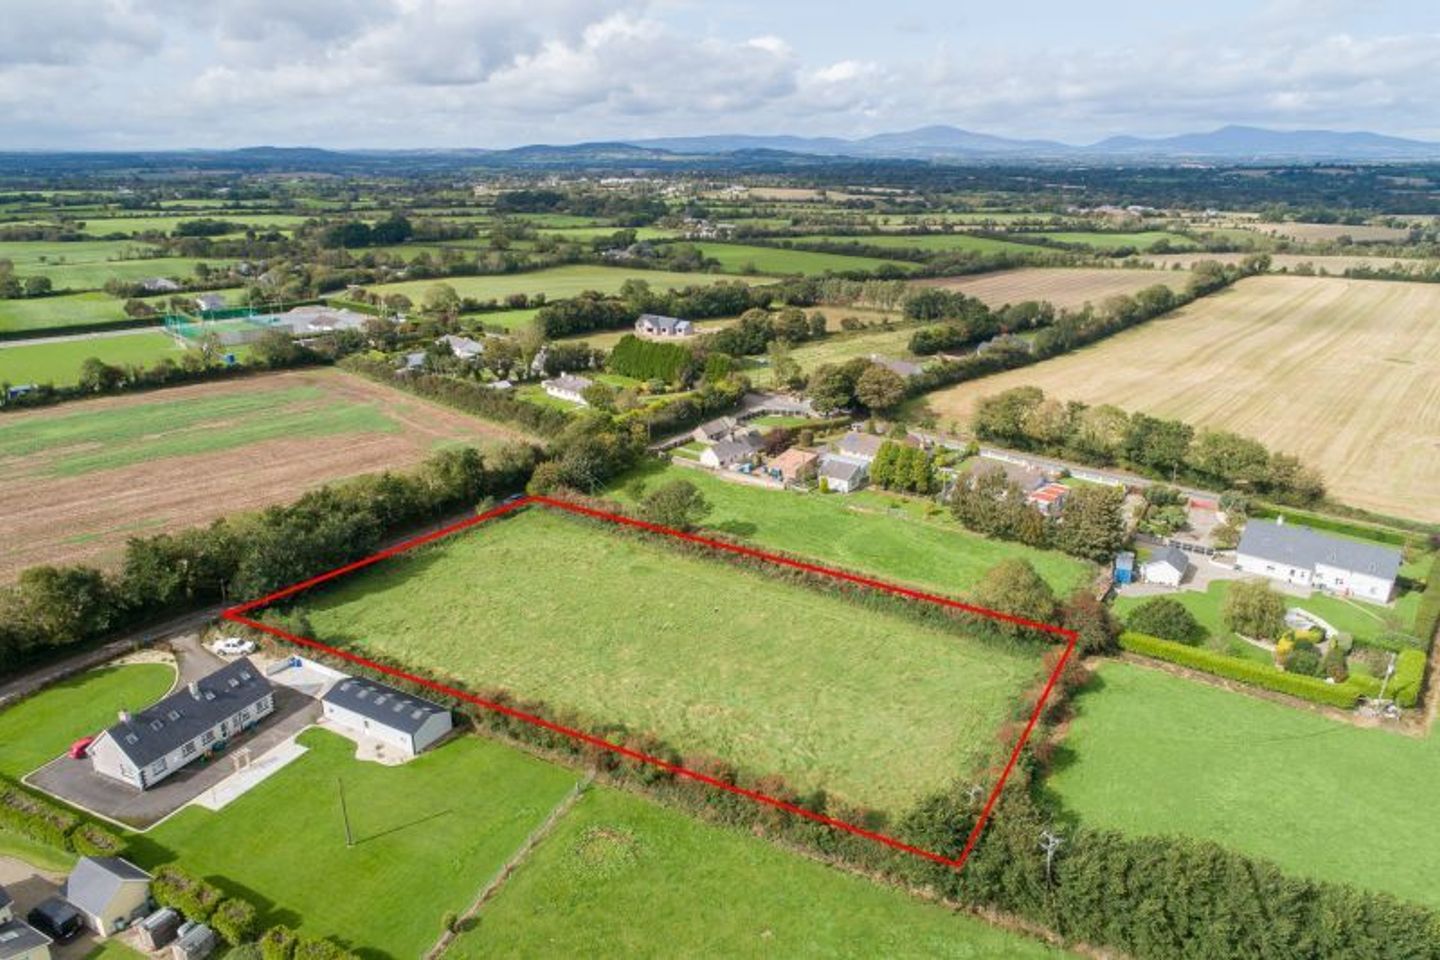 c. 1.5 Acre Site (SPP) at Rahale, Oilgate, Co. Wexford, Y21R588